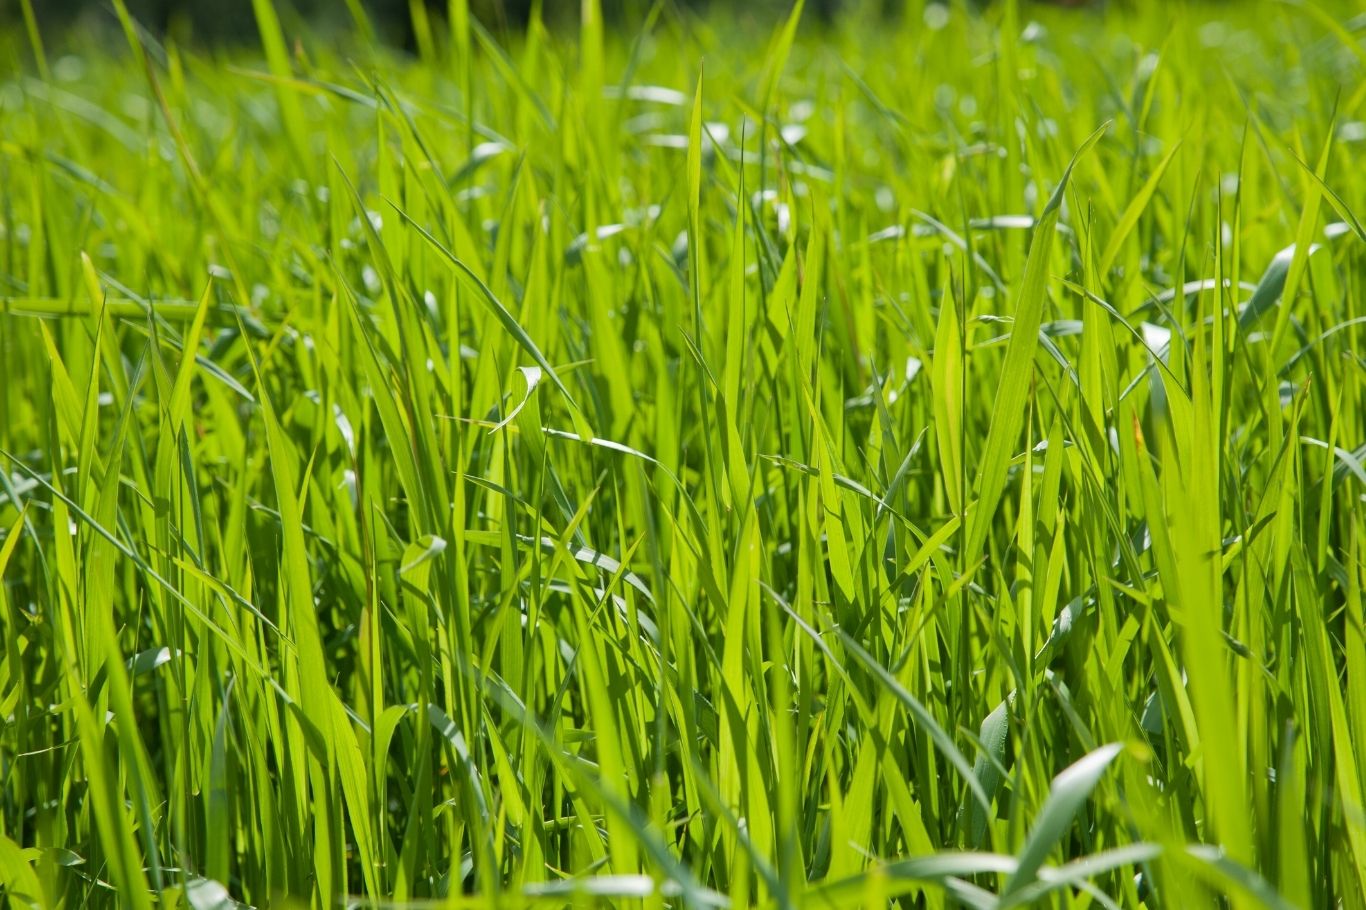 Shaping your grass sounds great when you have thicker and greener grass. When it comes to your lawn, there is no magical formula that can turn your grass greener and healthier overnight. Thicker and Greener Grass